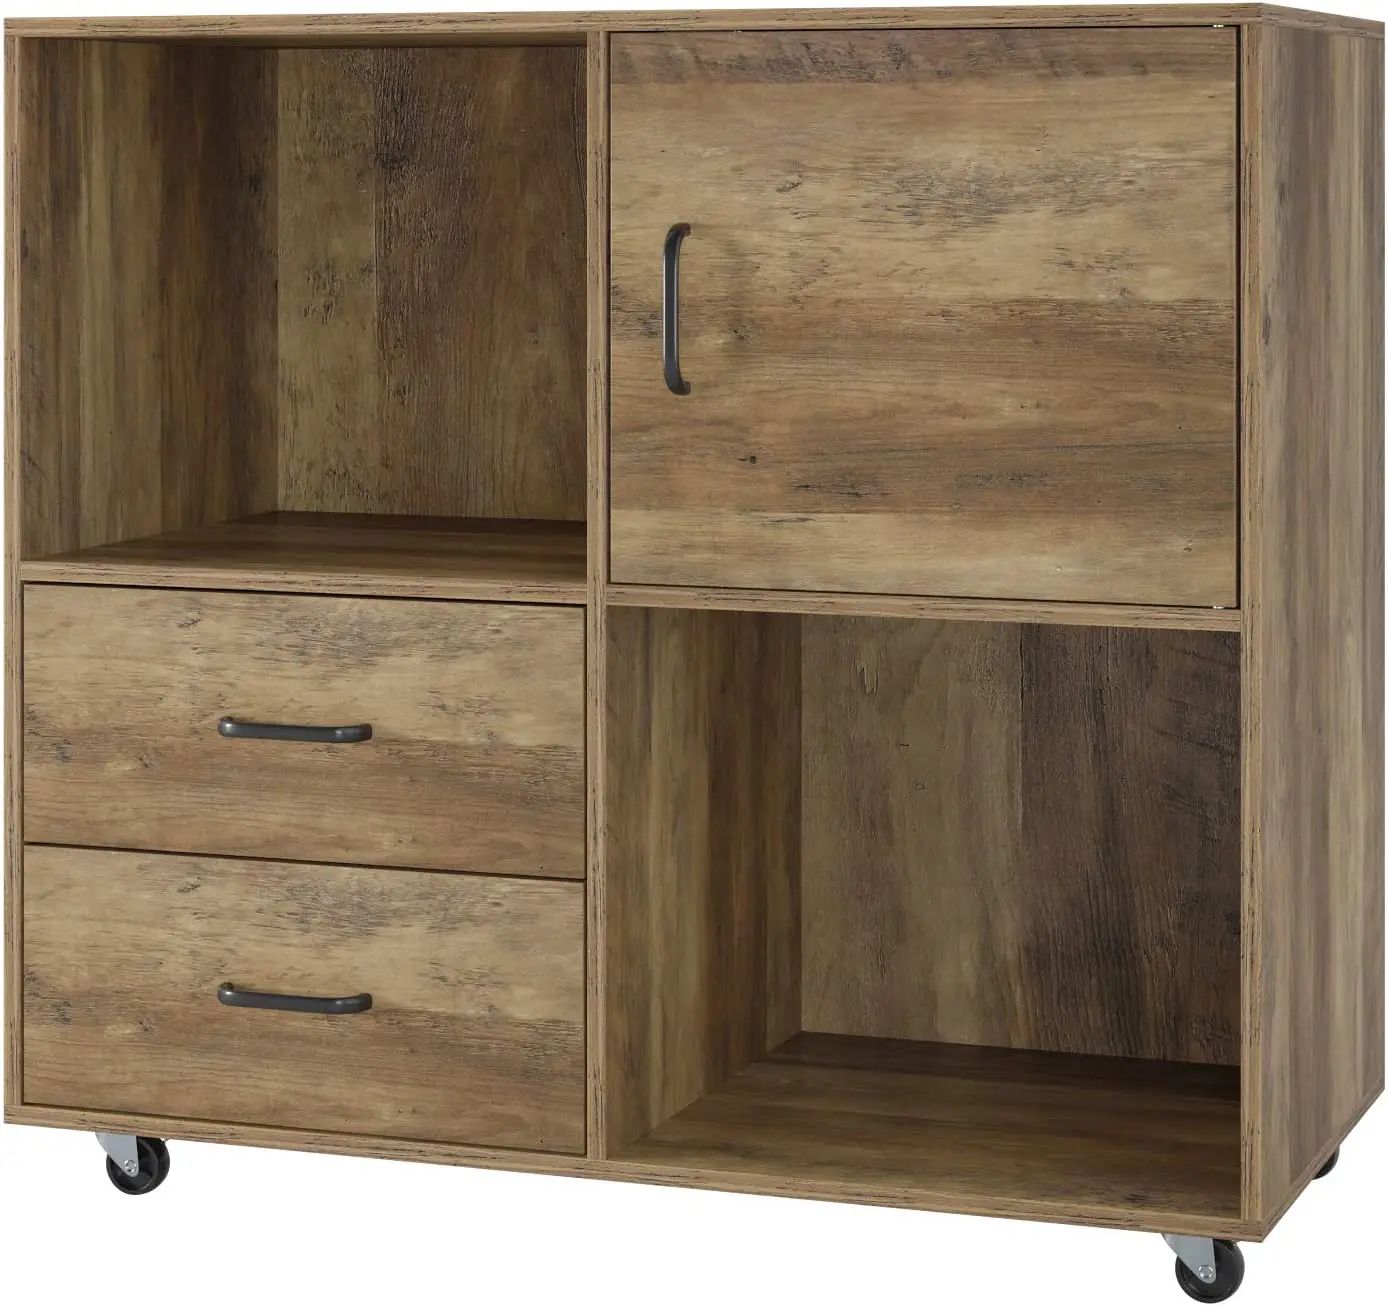 Wood File Cabinet With Drawers And Wheels Printer Stand With Storage Shelves Large Mobile Filing Cabinet